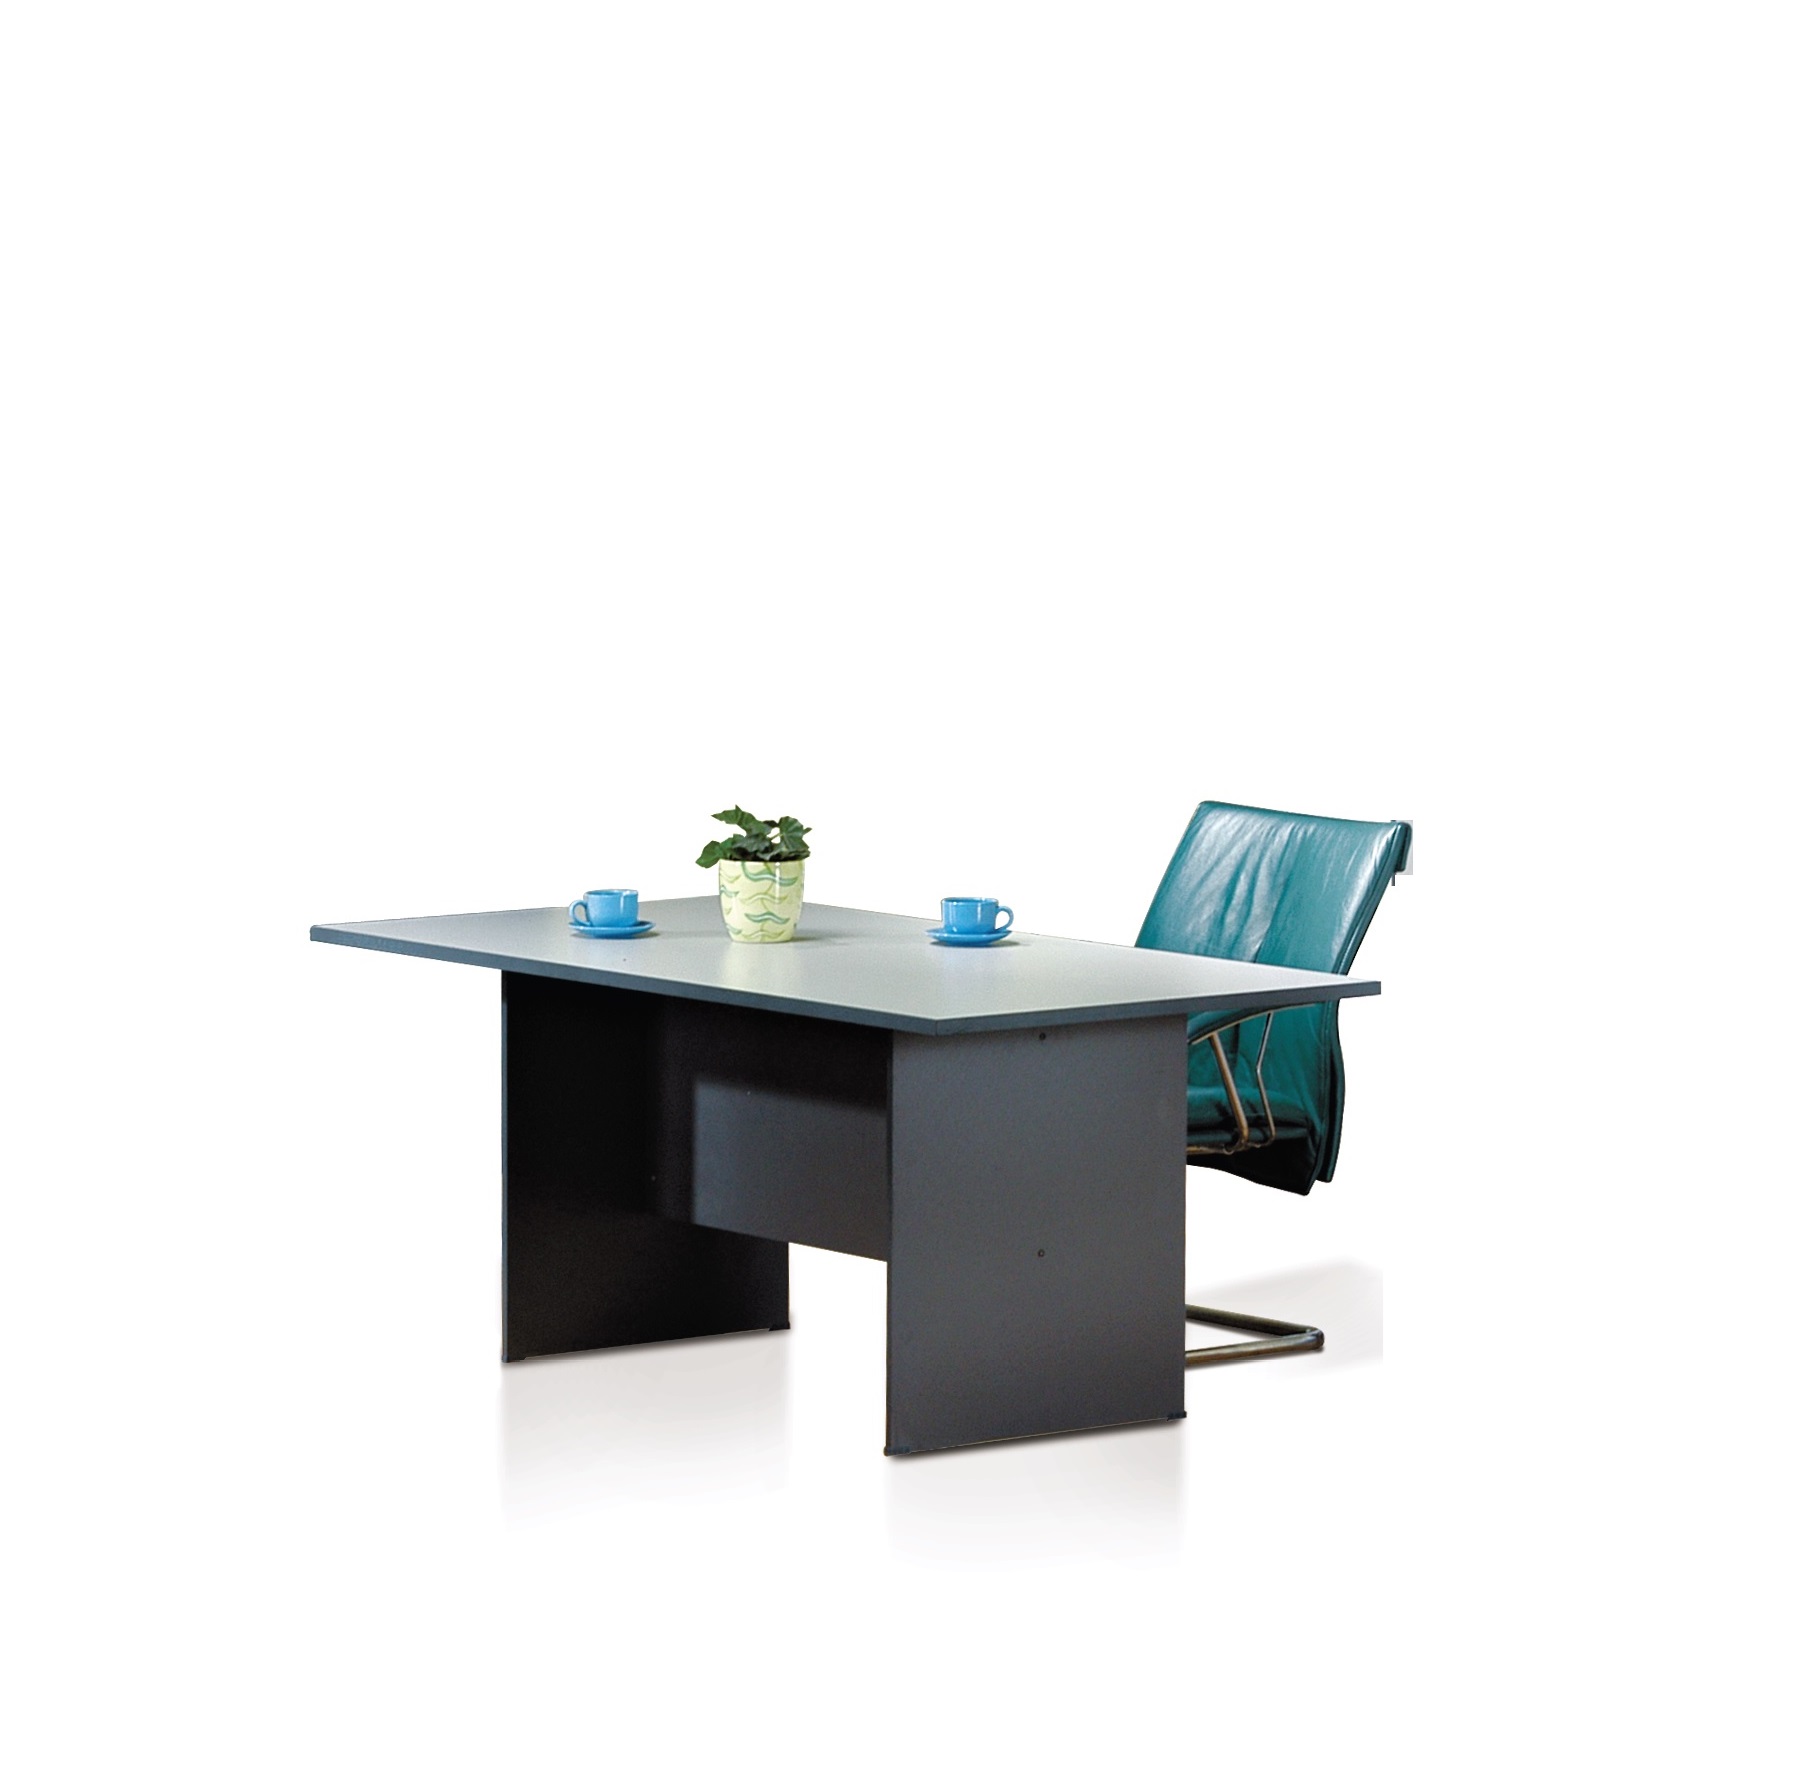 T2-Series Conference Table